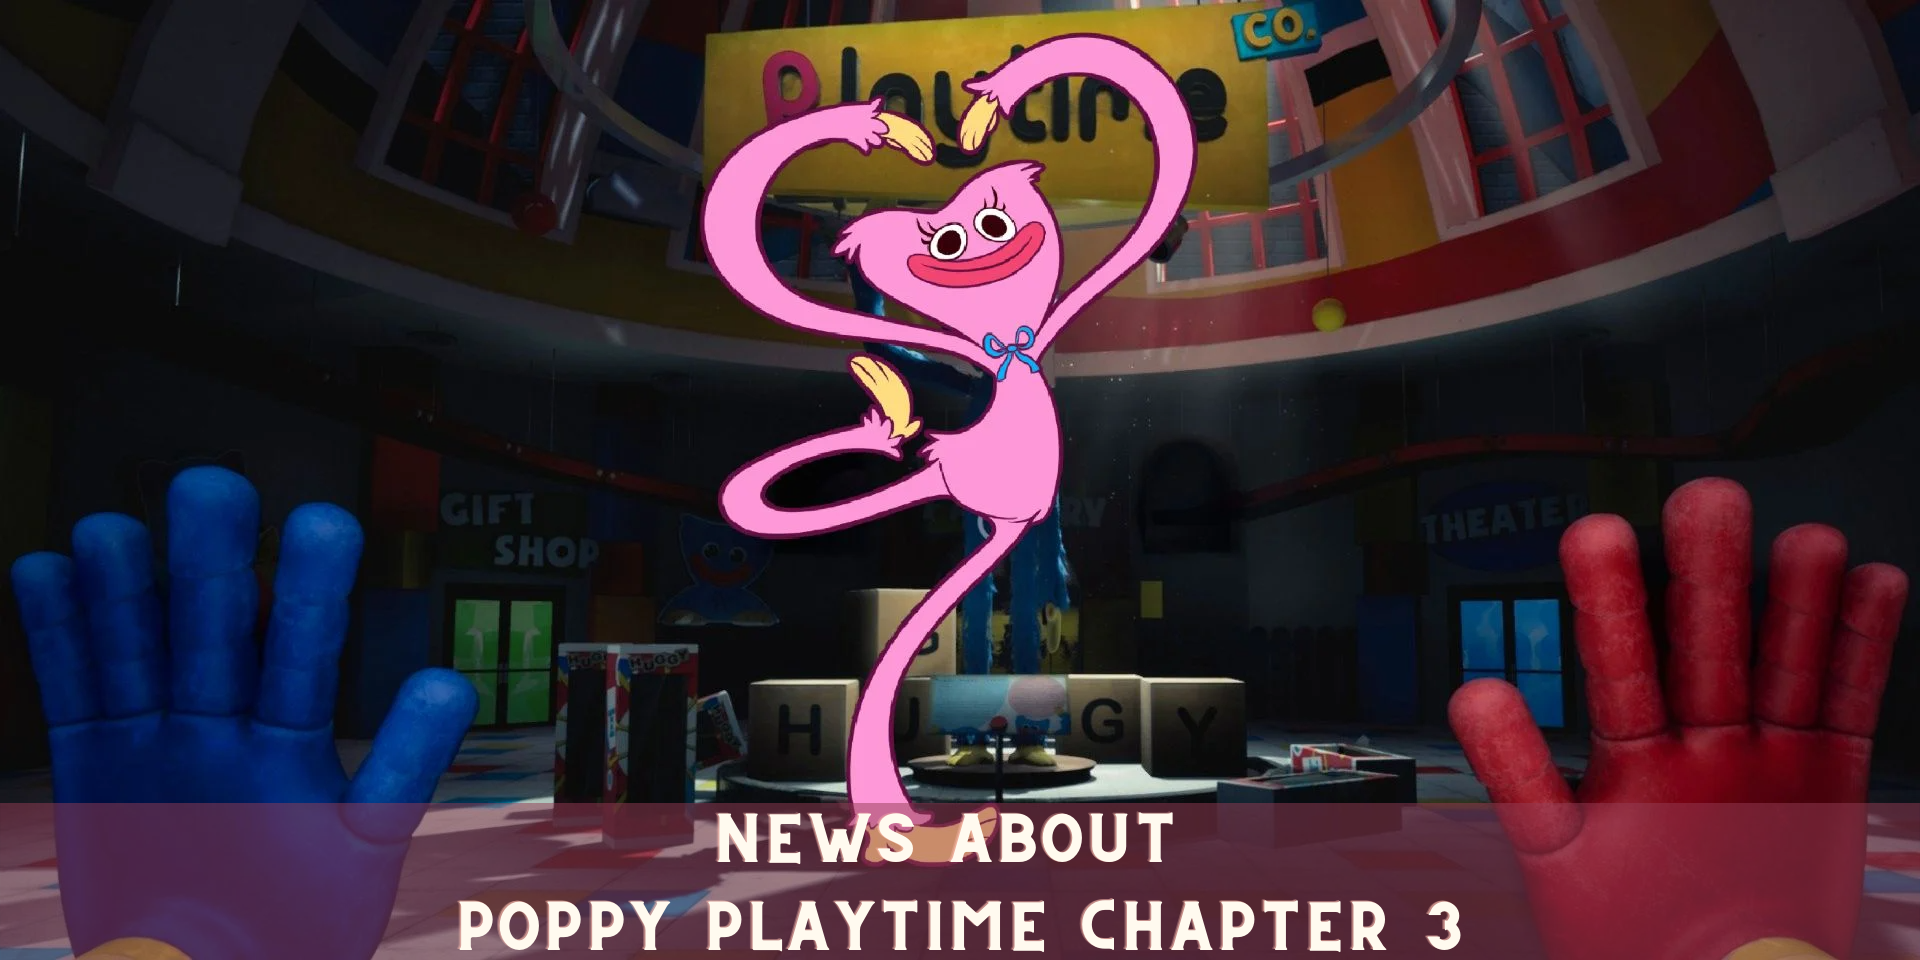 News About Poppy Playtime Chapter 3